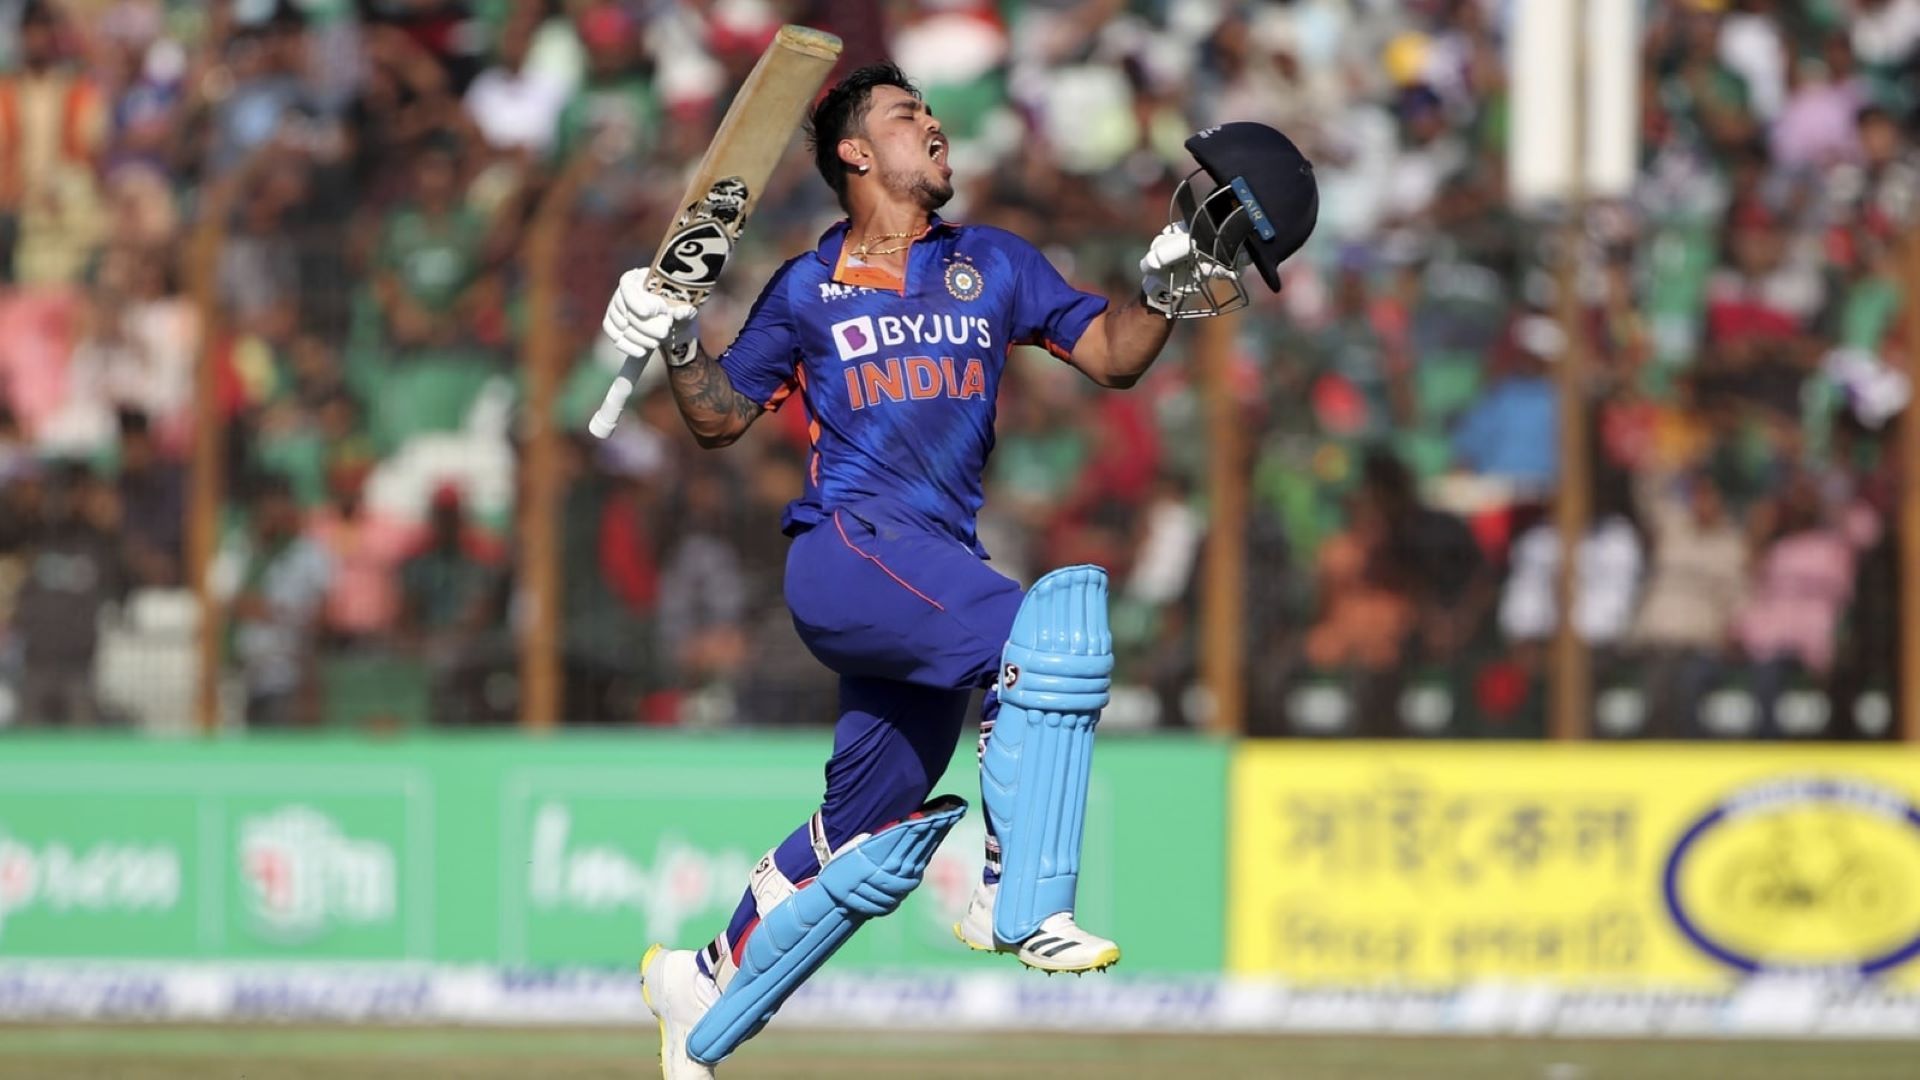 Ishan Kishan is one of only five Indian batters to score a double century in ODIs